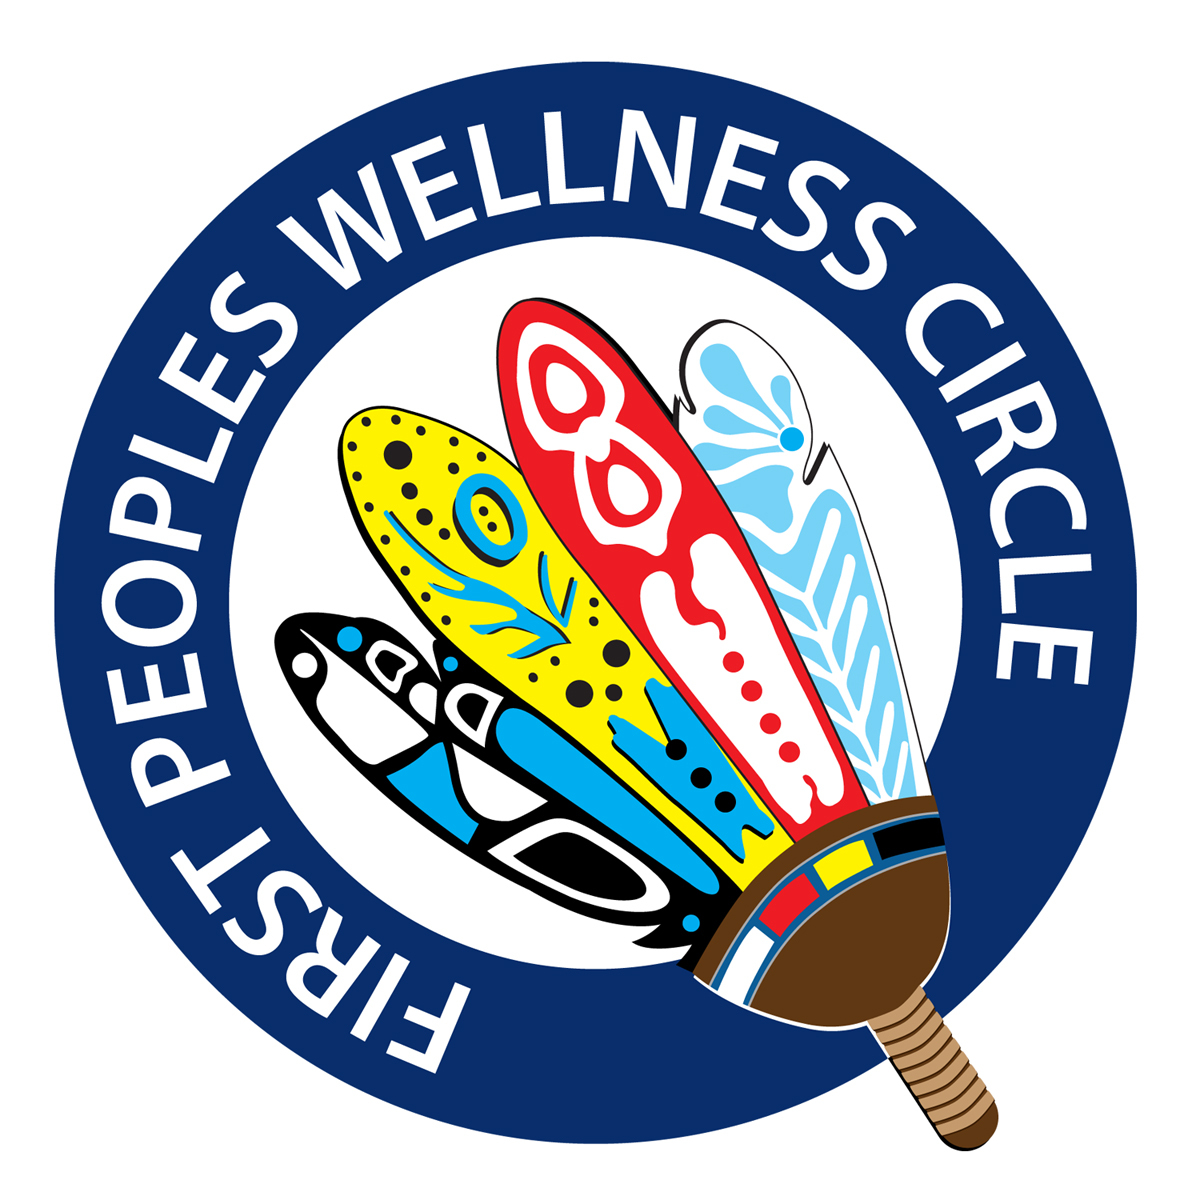 First Peoples Wellness Circle logo